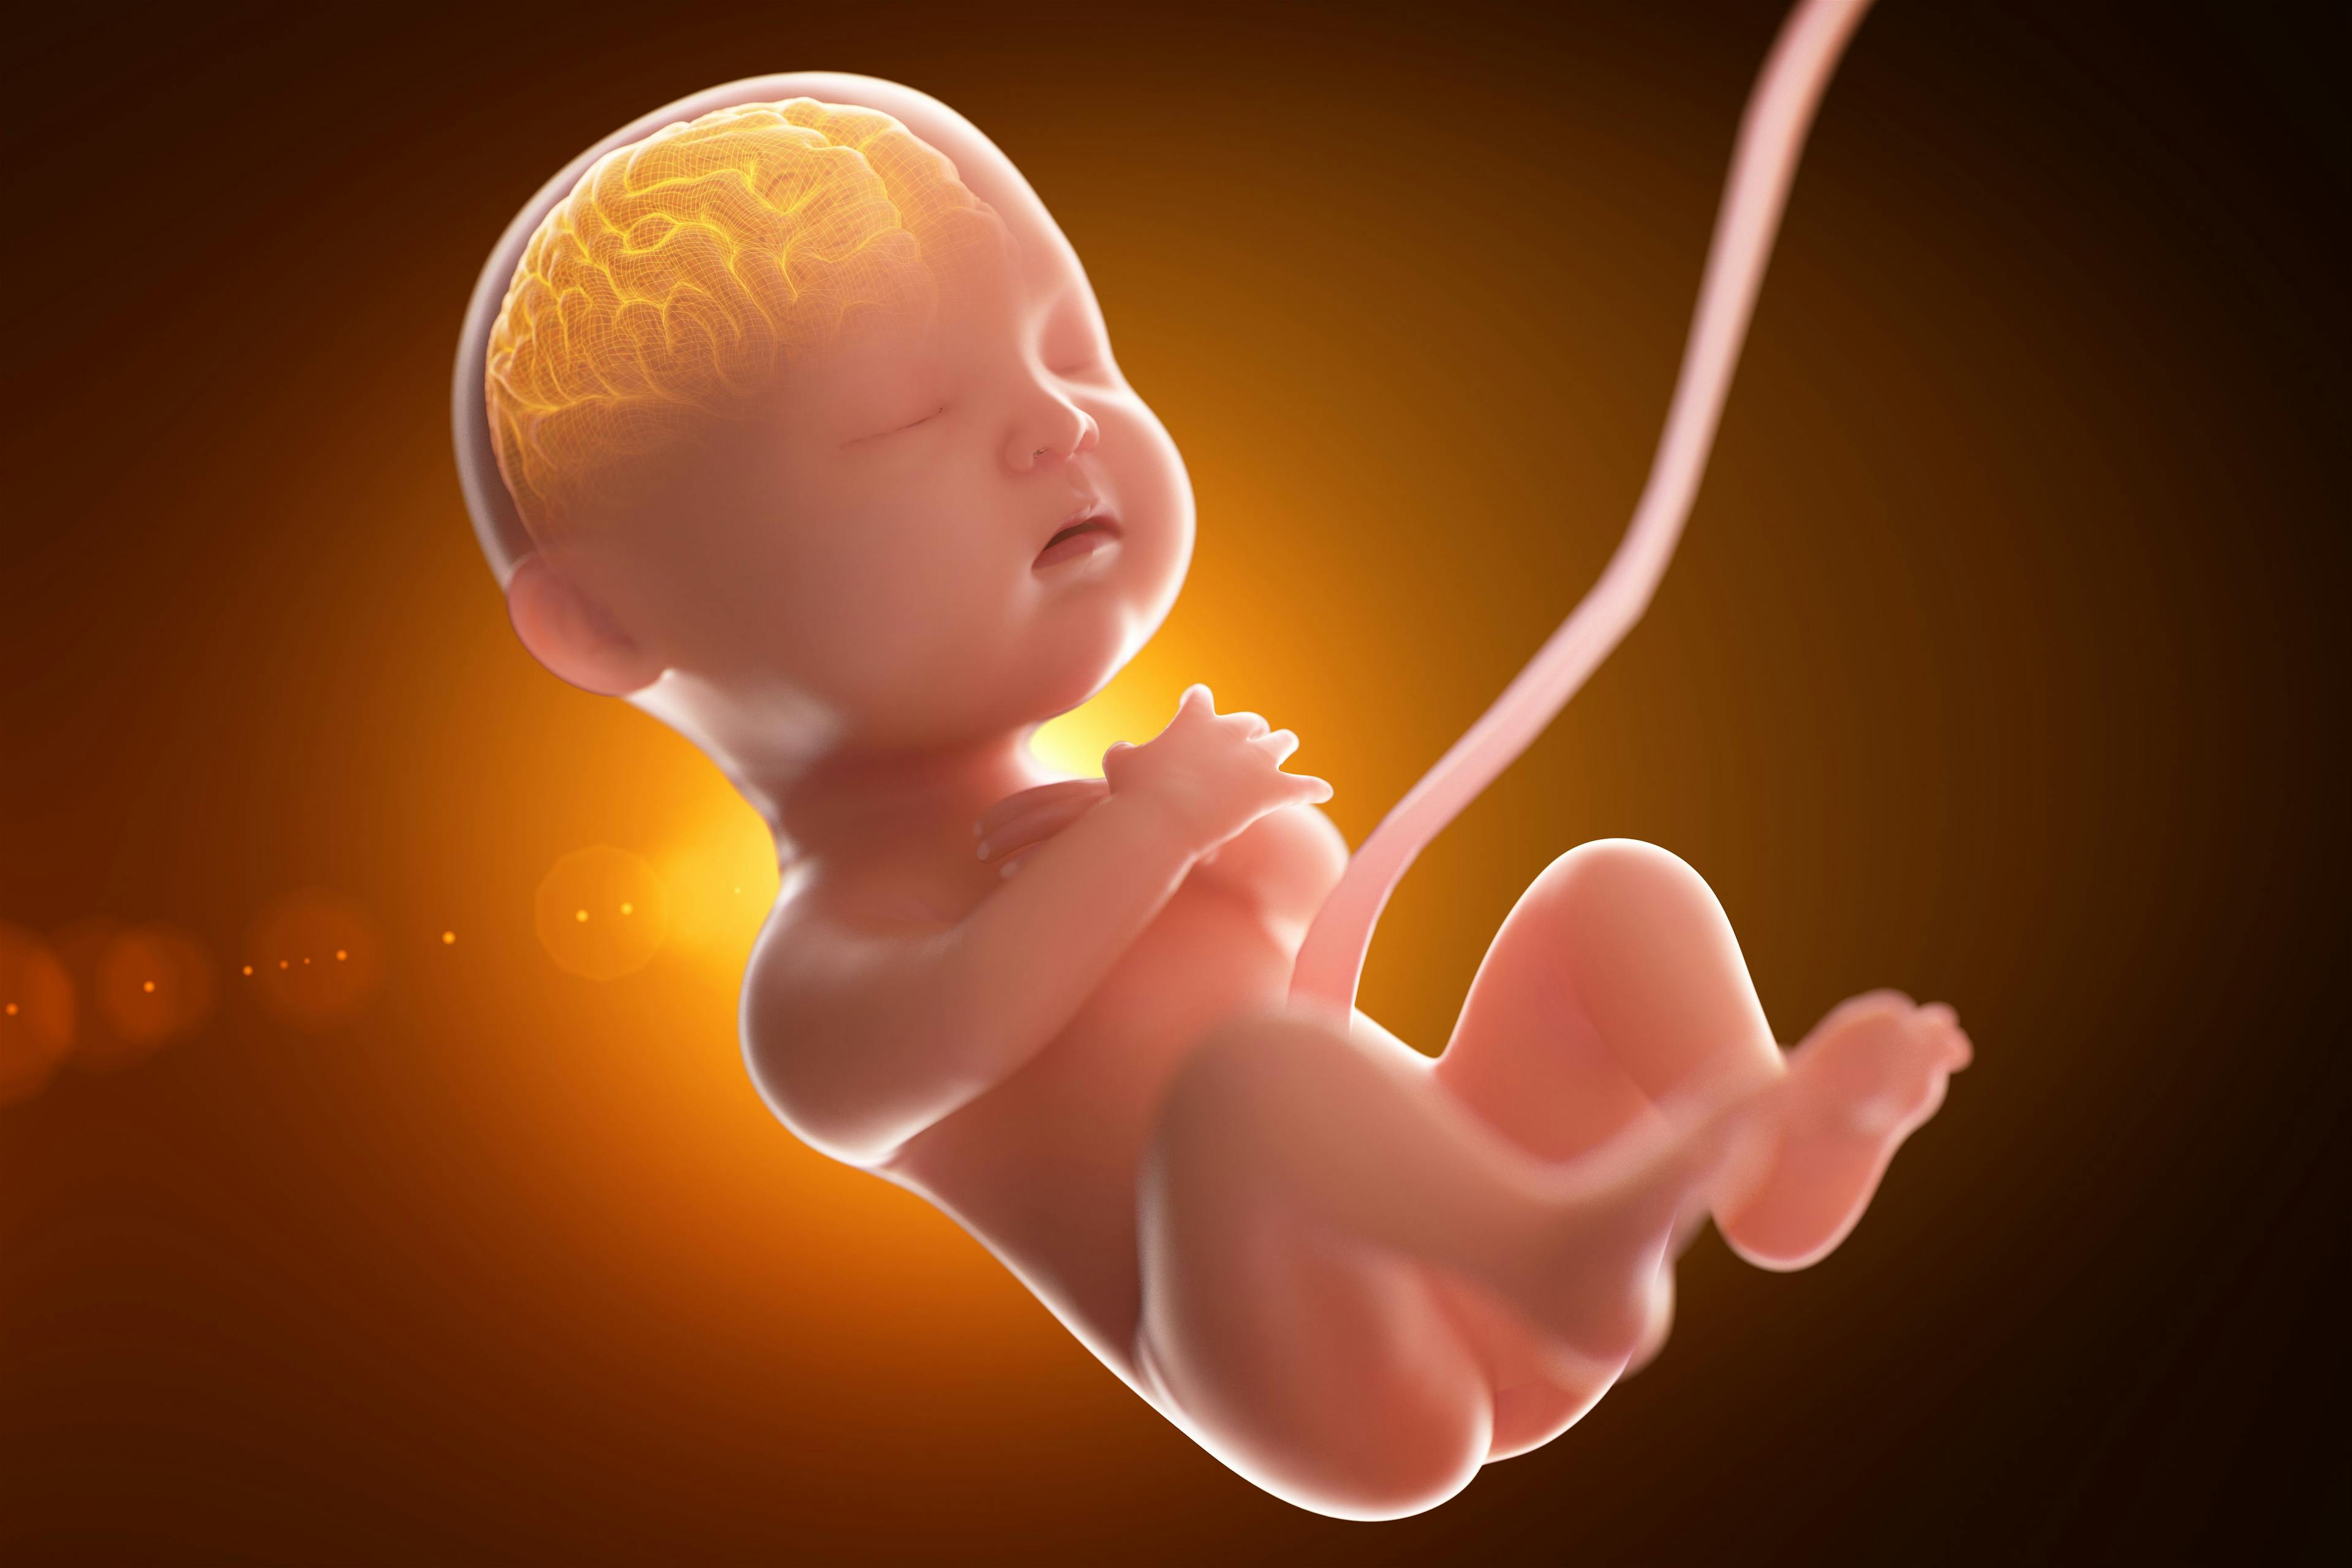 3D imaging tracks fetal head and brain shape during labor